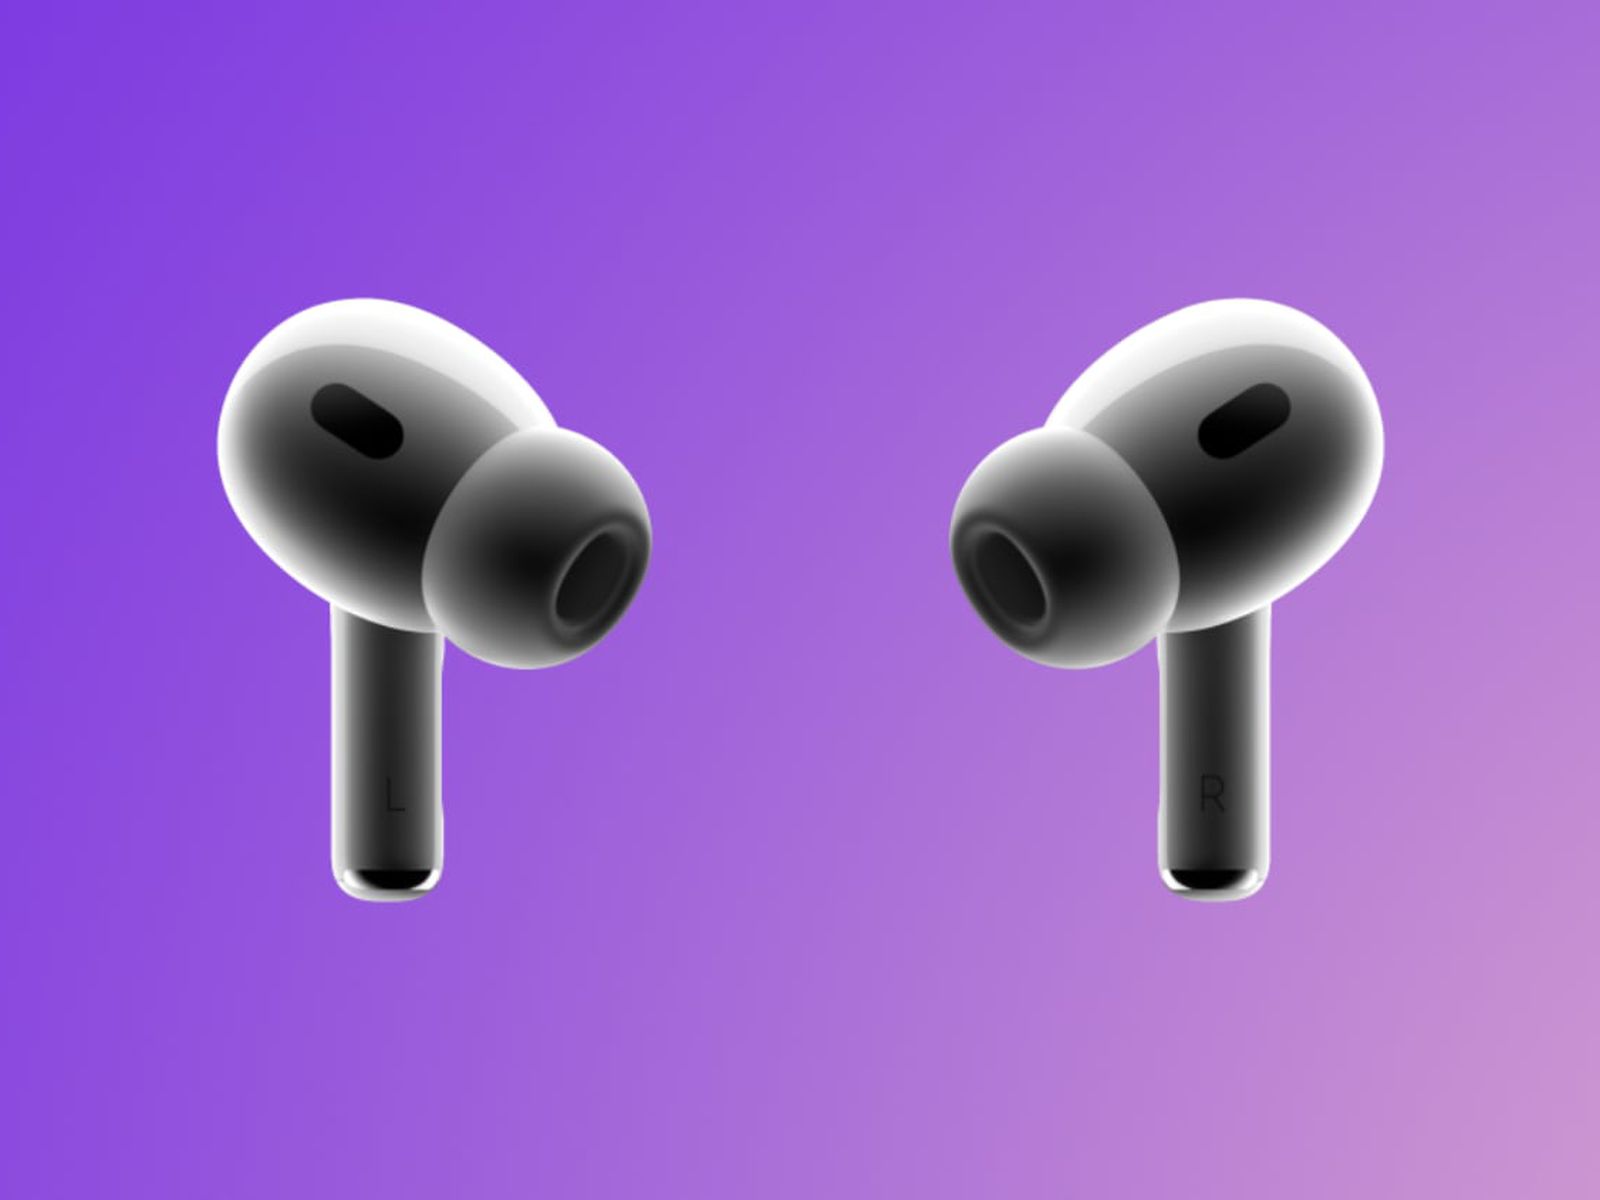 AirPods Pro: Just Launched! New H2 Chip and Better Battery Life